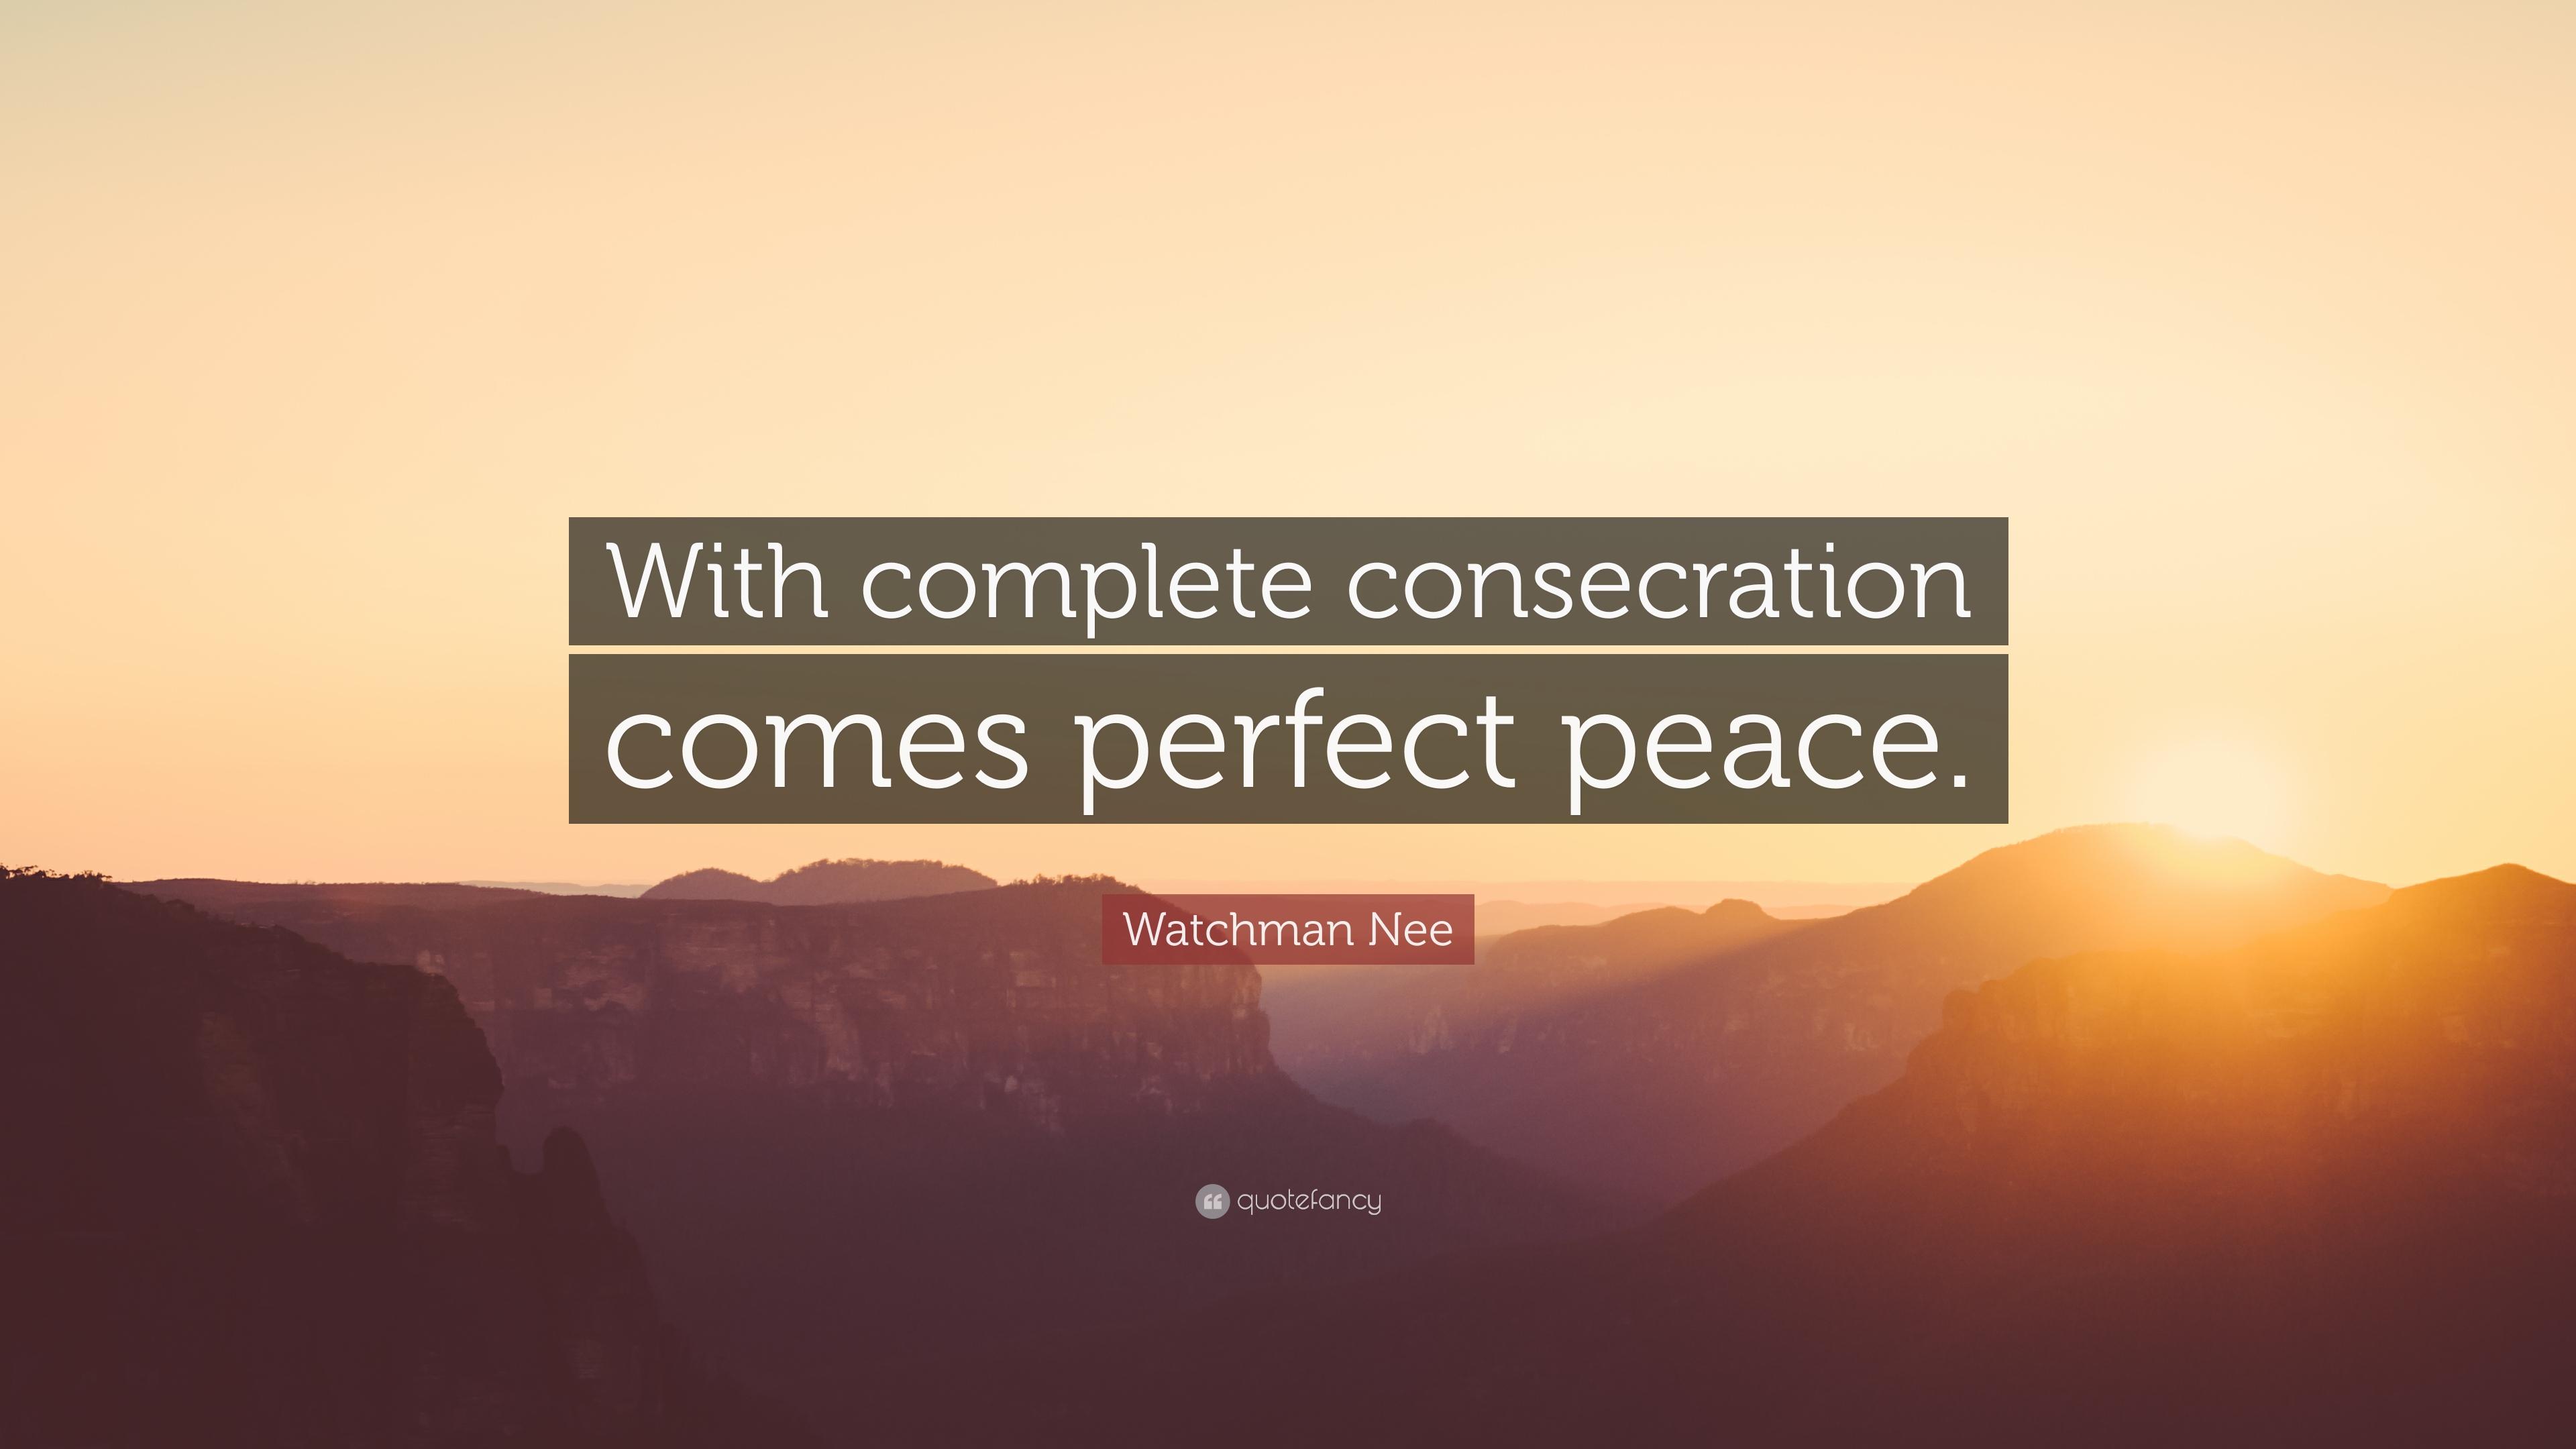 Watchman Nee Quote: “With complete consecration comes